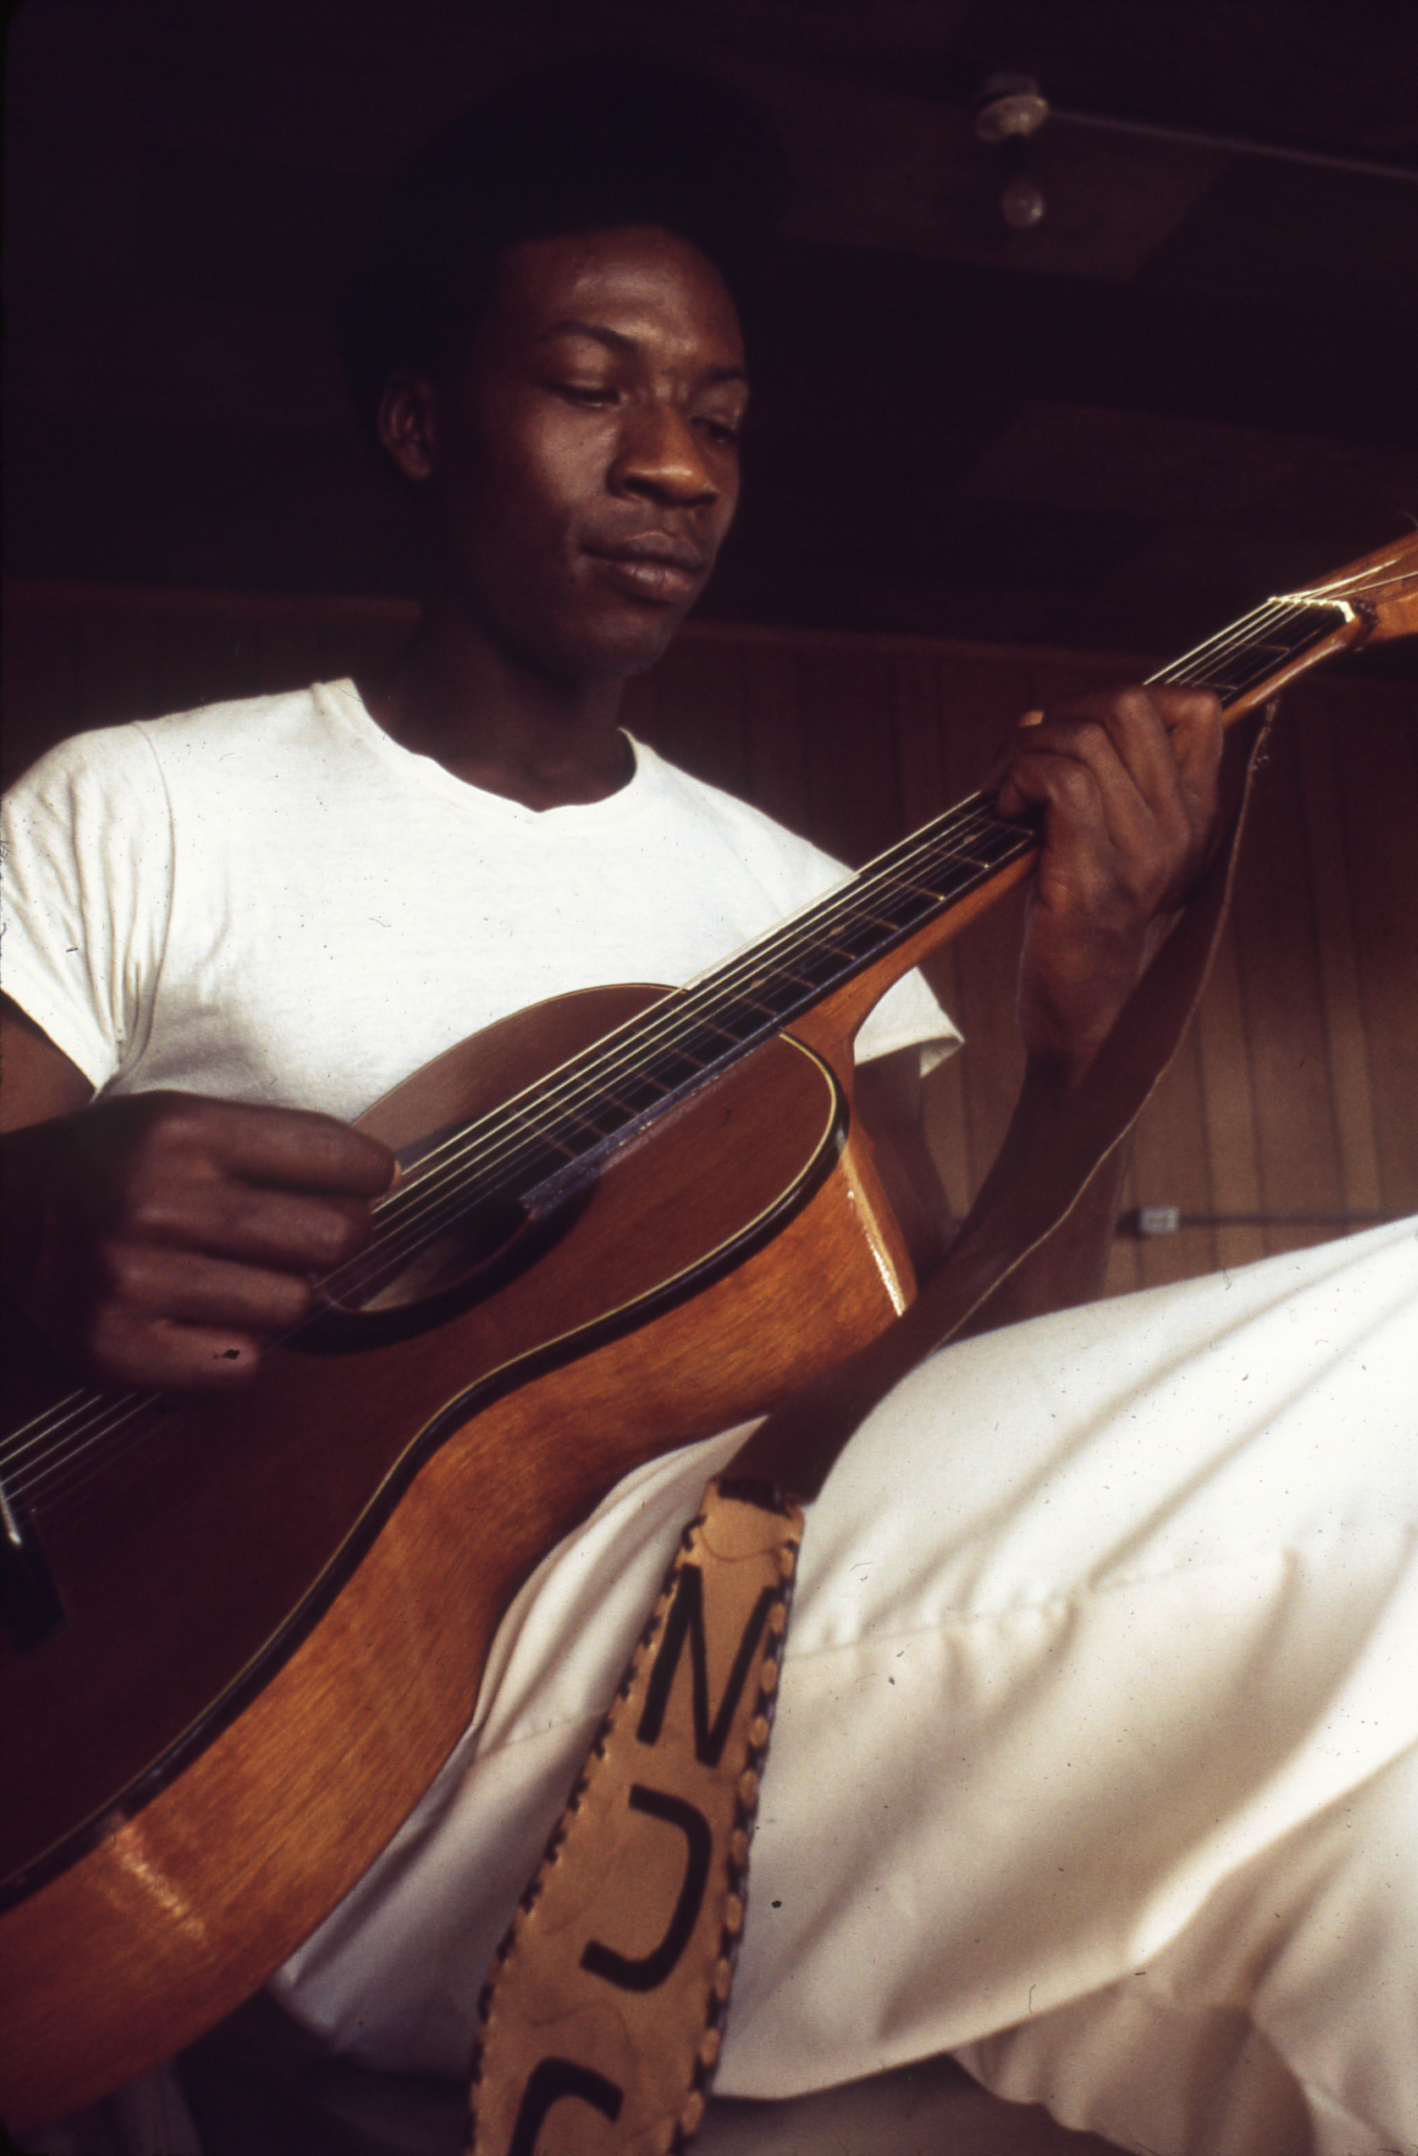 Slide 9: This is a closeup picture of a Black man in a white prison uniform playing a nylon string guitar.